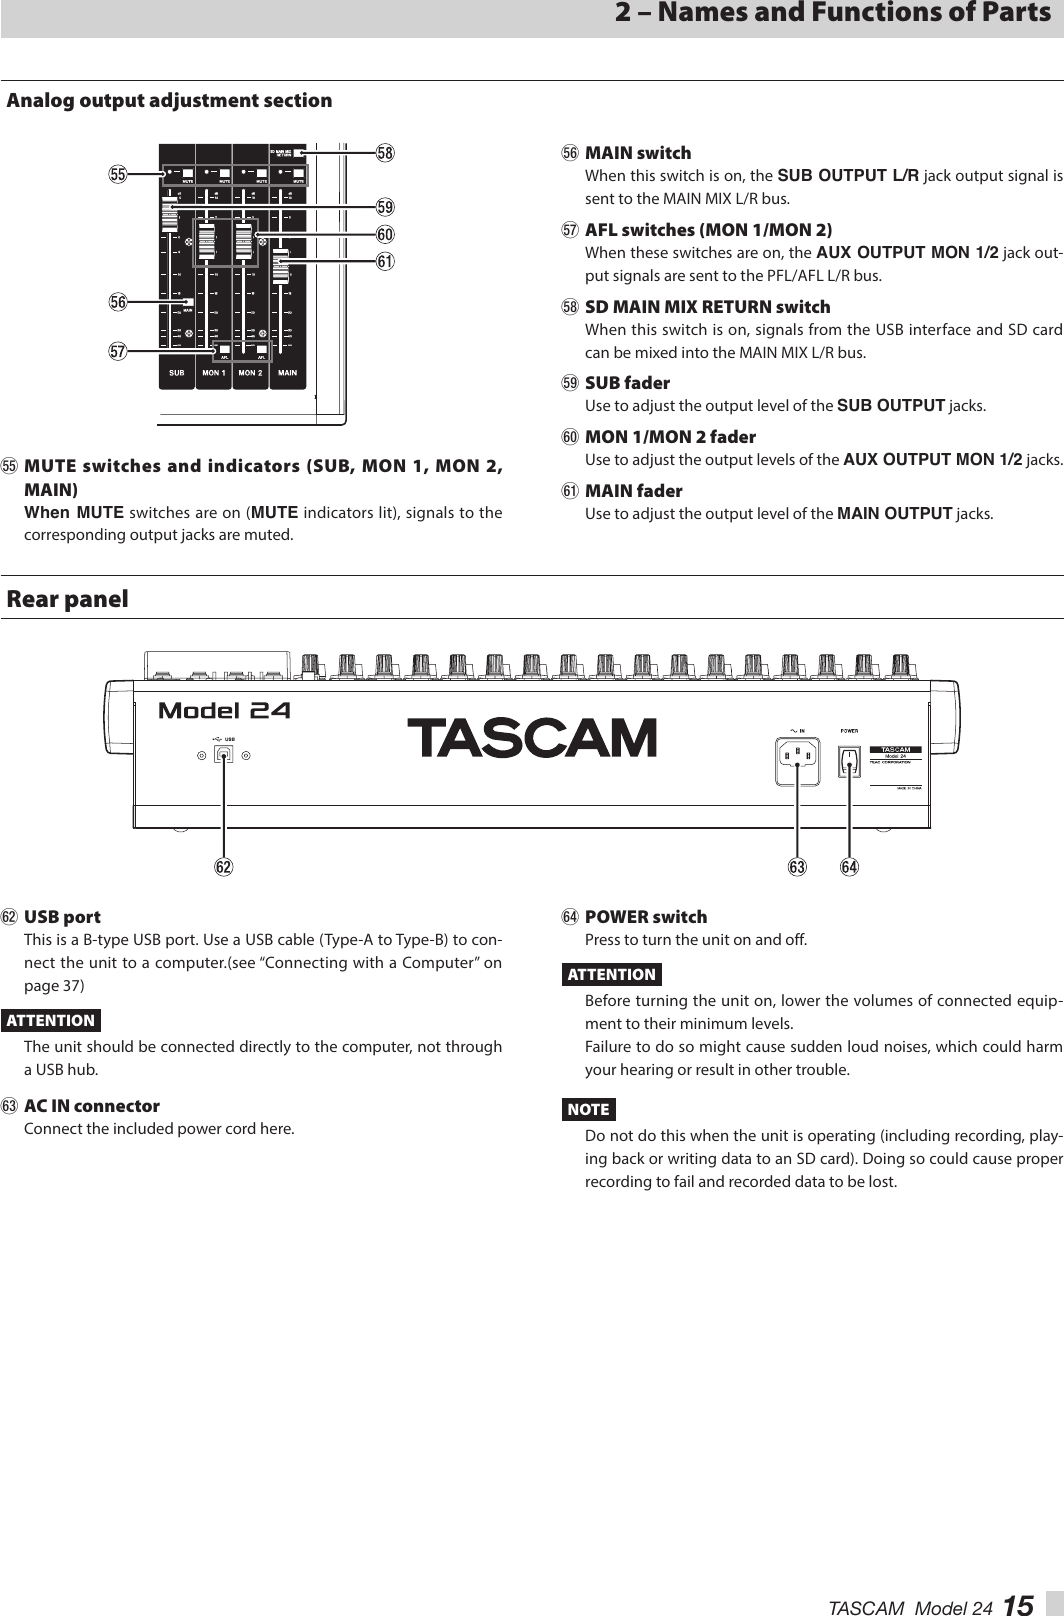 TASCAM  Model 24 152 – Names and Functions of PartsAnalog output adjustment sectionT MUTE switches and indicators (SUB, MON 1, MON 2, MAIN)When MUTE switches are on (MUTE indicators lit), signals to the corresponding output jacks are muted.Y MAIN switchWhen this switch is on, the SUB OUTPUT L/R jack output signal is sent to the MAIN MIX L/R bus.U AFL switches (MON 1/MON 2)When these switches are on, the AUX OUTPUT MON 1/2 jack out-put signals are sent to the PFL/AFL L/R bus.I SD MAIN MIX RETURN switchWhen this switch is on, signals from the USB interface and SD card can be mixed into the MAIN MIX L/R bus.O SUB faderUse to adjust the output level of the SUB OUTPUT jacks.P MON 1/MON 2 faderUse to adjust the output levels of the AUX OUTPUT MON 1/2 jacks.A MAIN faderUse to adjust the output level of the MAIN OUTPUT jacks.Rear panelS USB portThis is a B-type USB port. Use a USB cable (Type-A to Type-B) to con-nect the unit to a computer.(see “Connecting with a Computer” on page 37)ATTENTIONThe unit should be connected directly to the computer, not through a USB hub.D AC IN connectorConnect the included power cord here.F POWER switchPress to turn the unit on and off.ATTENTIONBefore turning the unit on, lower the volumes of connected equip-ment to their minimum levels.Failure to do so might cause sudden loud noises, which could harm your hearing or result in other trouble.NOTEDo not do this when the unit is operating (including recording, play-ing back or writing data to an SD card). Doing so could cause proper recording to fail and recorded data to be lost.